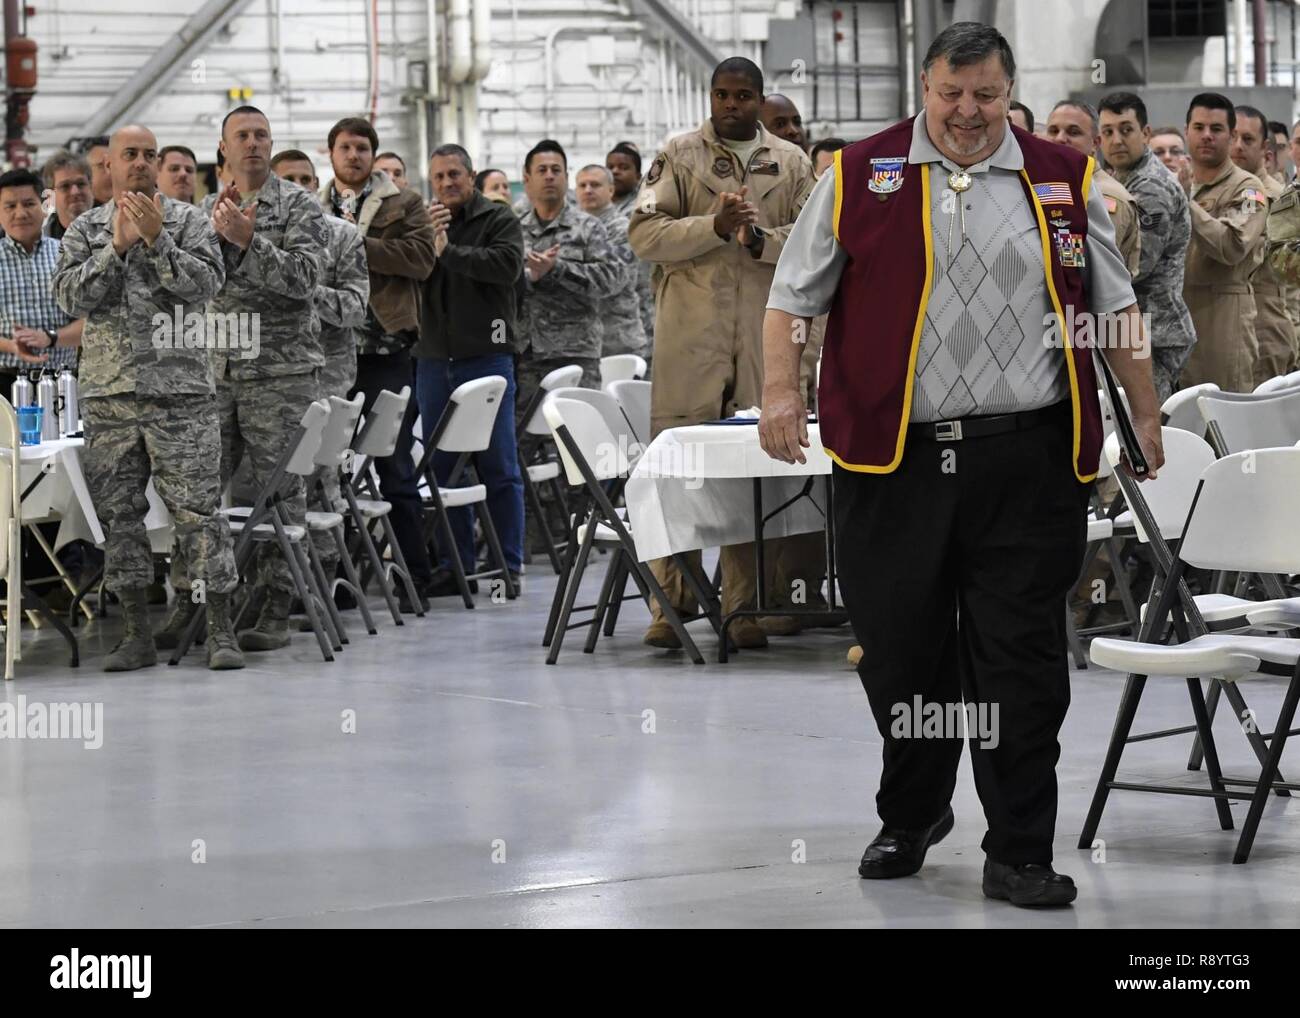 Members of the 437th Maintenance Group cheer as retired U.S. Air Force Capt. William Robinson, longest surviving enlisted prisoner of war, makes his way to the stage during an award ceremony here, March 17, 2017. Robinson was a POW for nearly eight years before being released. Now, Robinson speaks about his experience with community and military members across the country. Stock Photo